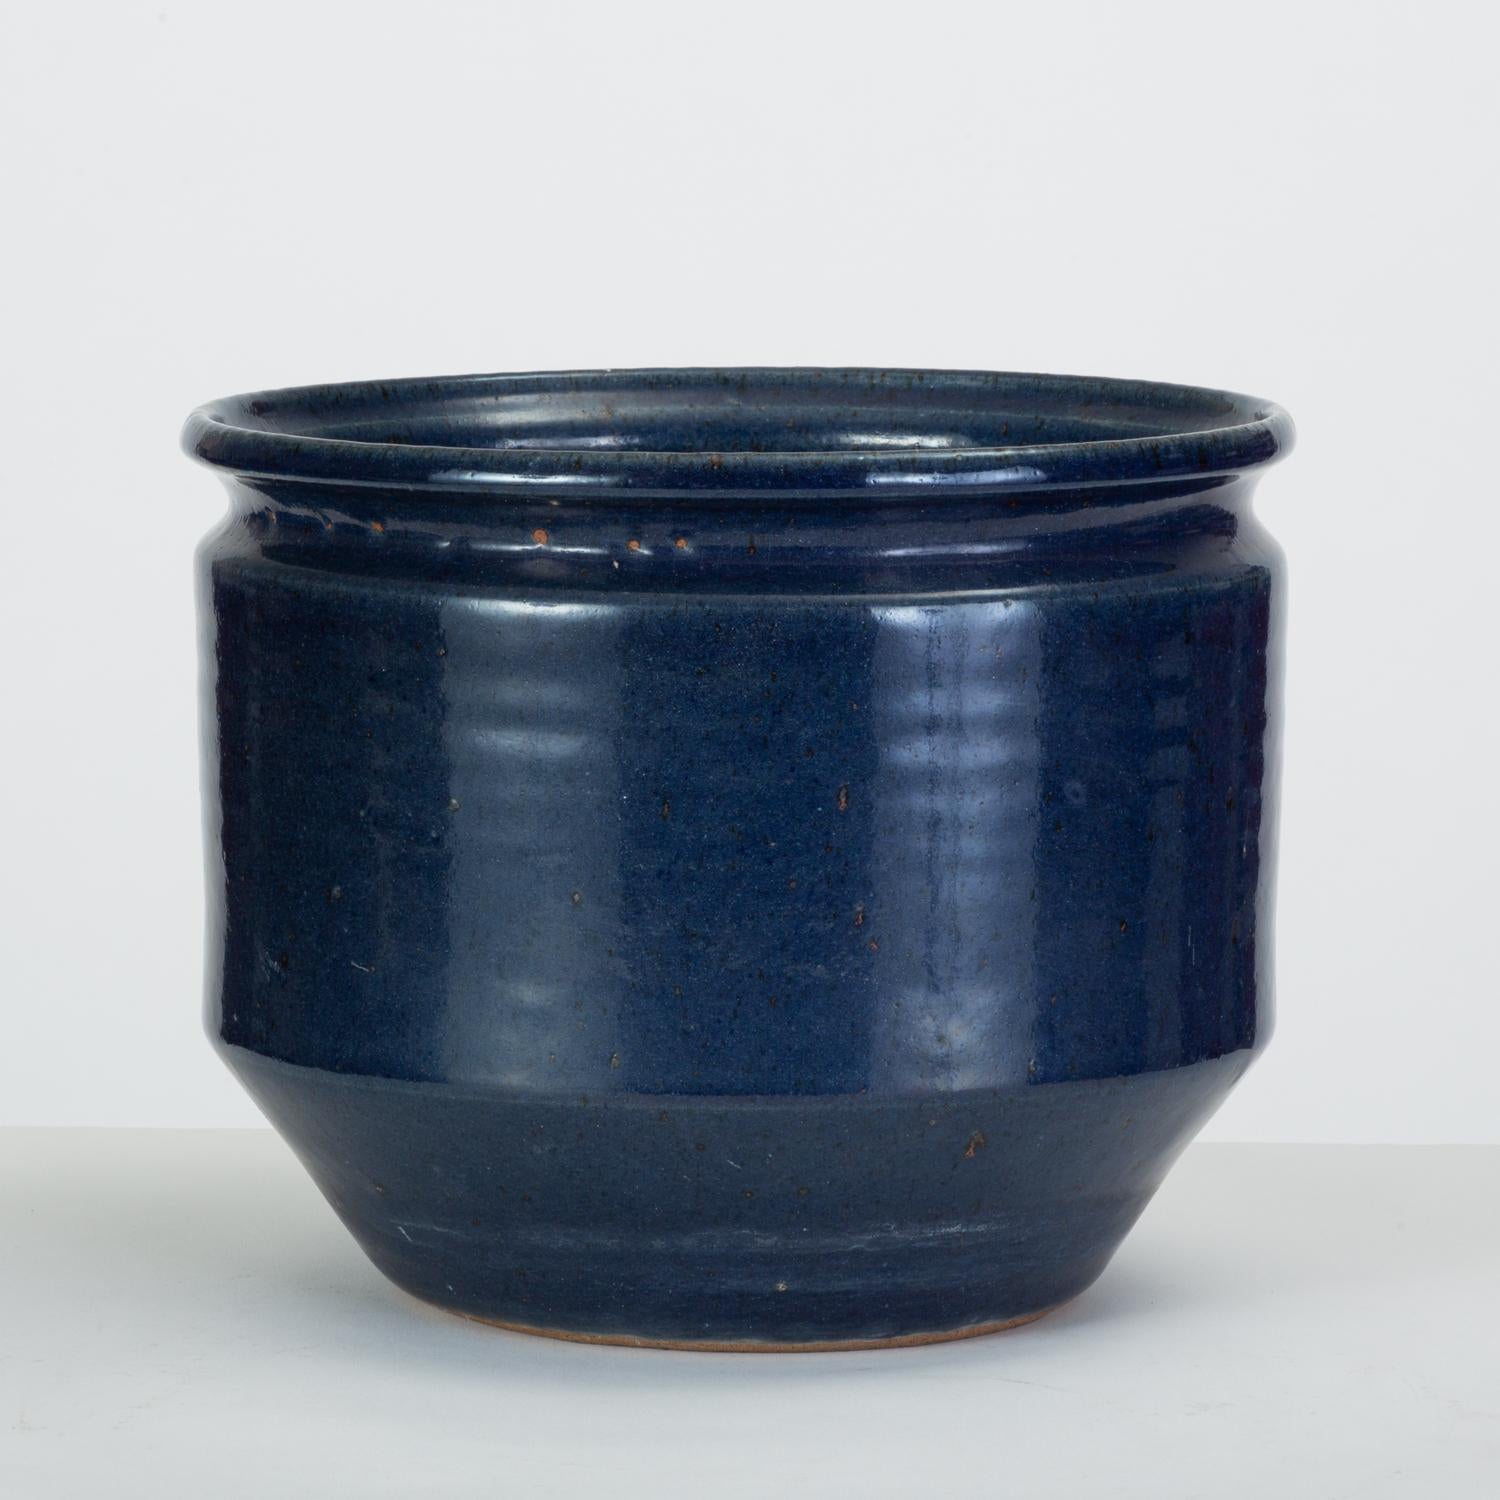 American Pair of Blue-Glazed Earthgender Bowl Planters, David Cressey and Robert Maxwell